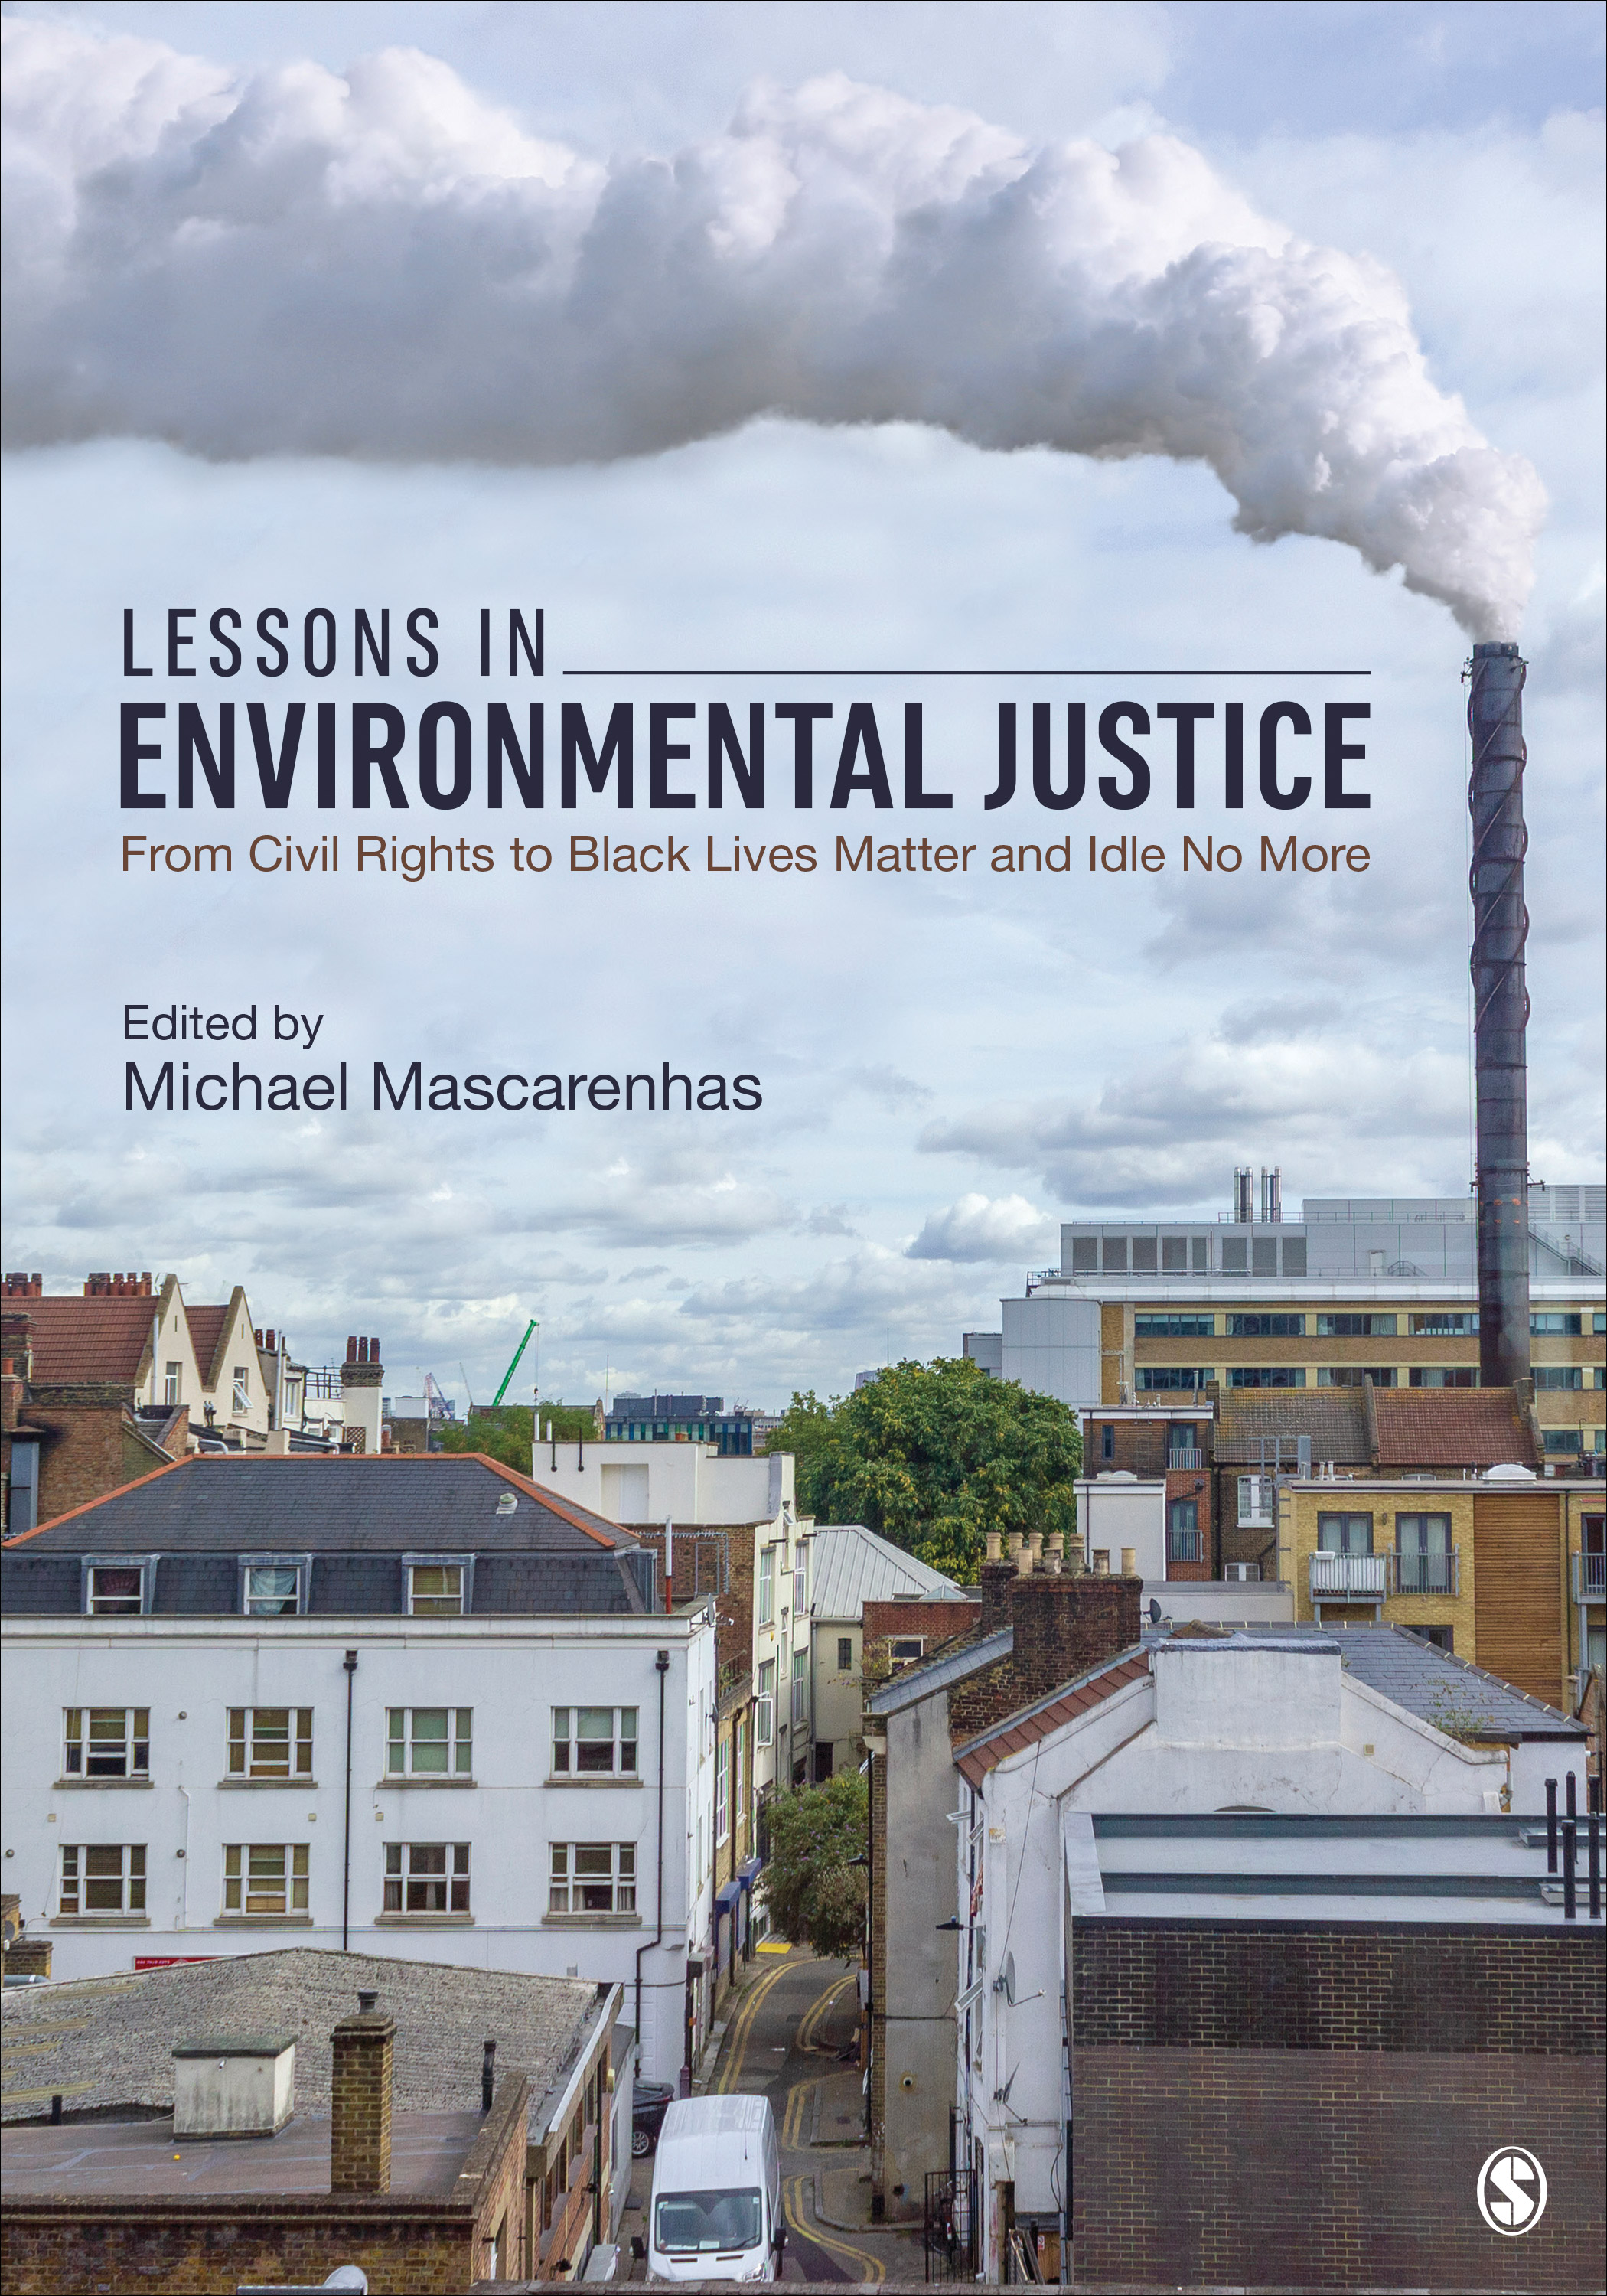 research on environmental justice